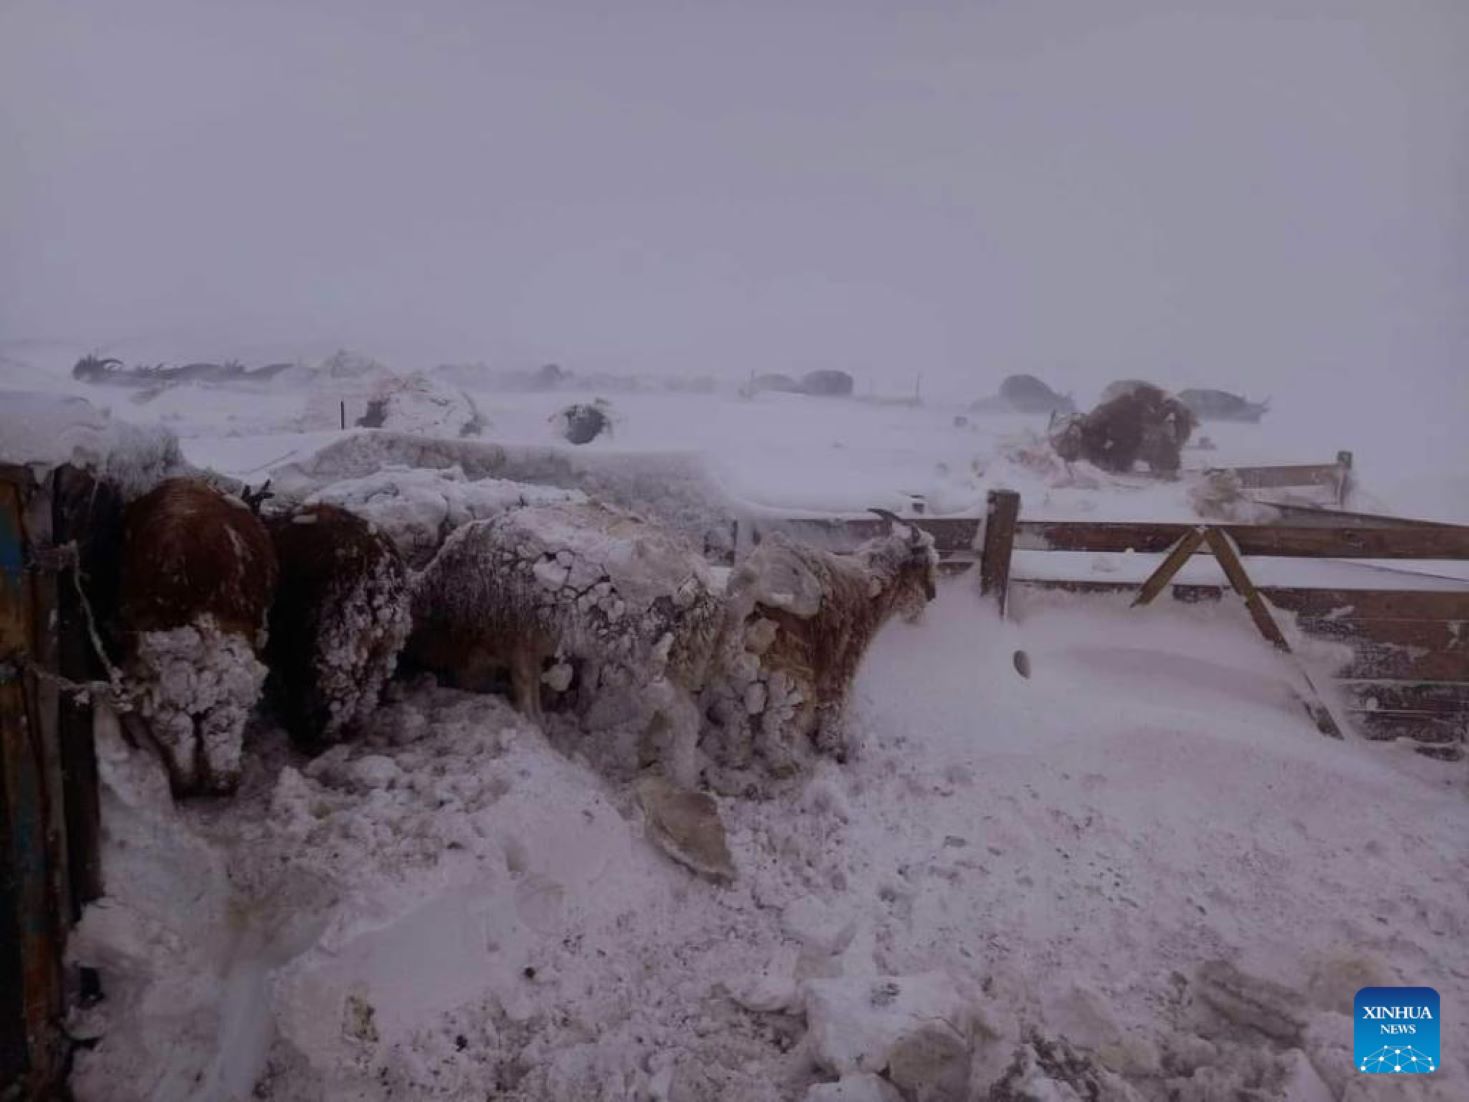 At Least 46 People Missing In Mongolia Due To Blizzards